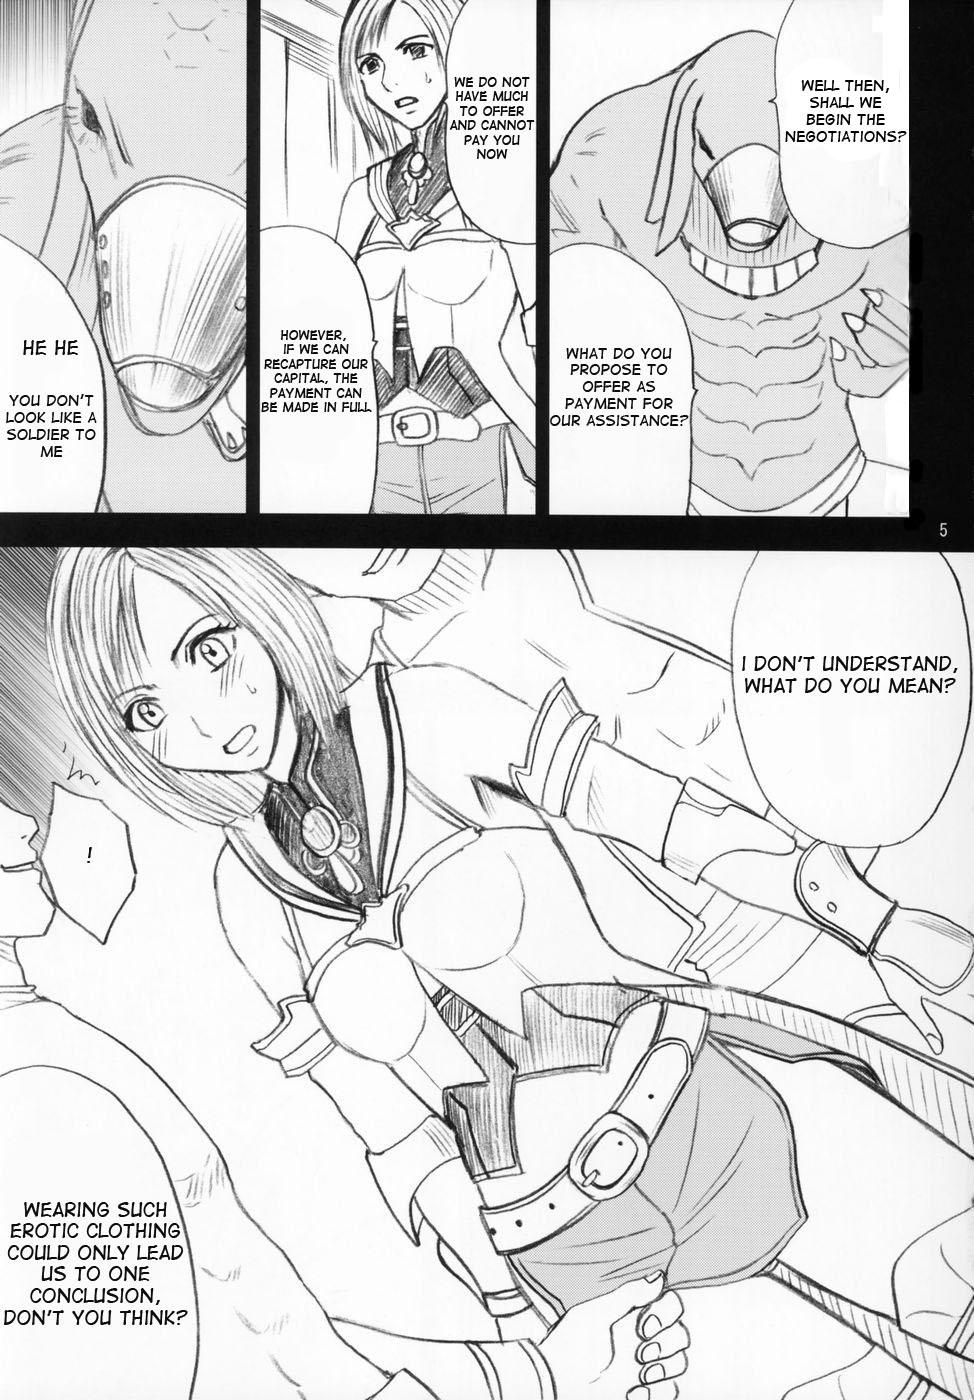 Amateur Blowjob Revenge Or Freedom - Final fantasy xii Grosso - Page 6